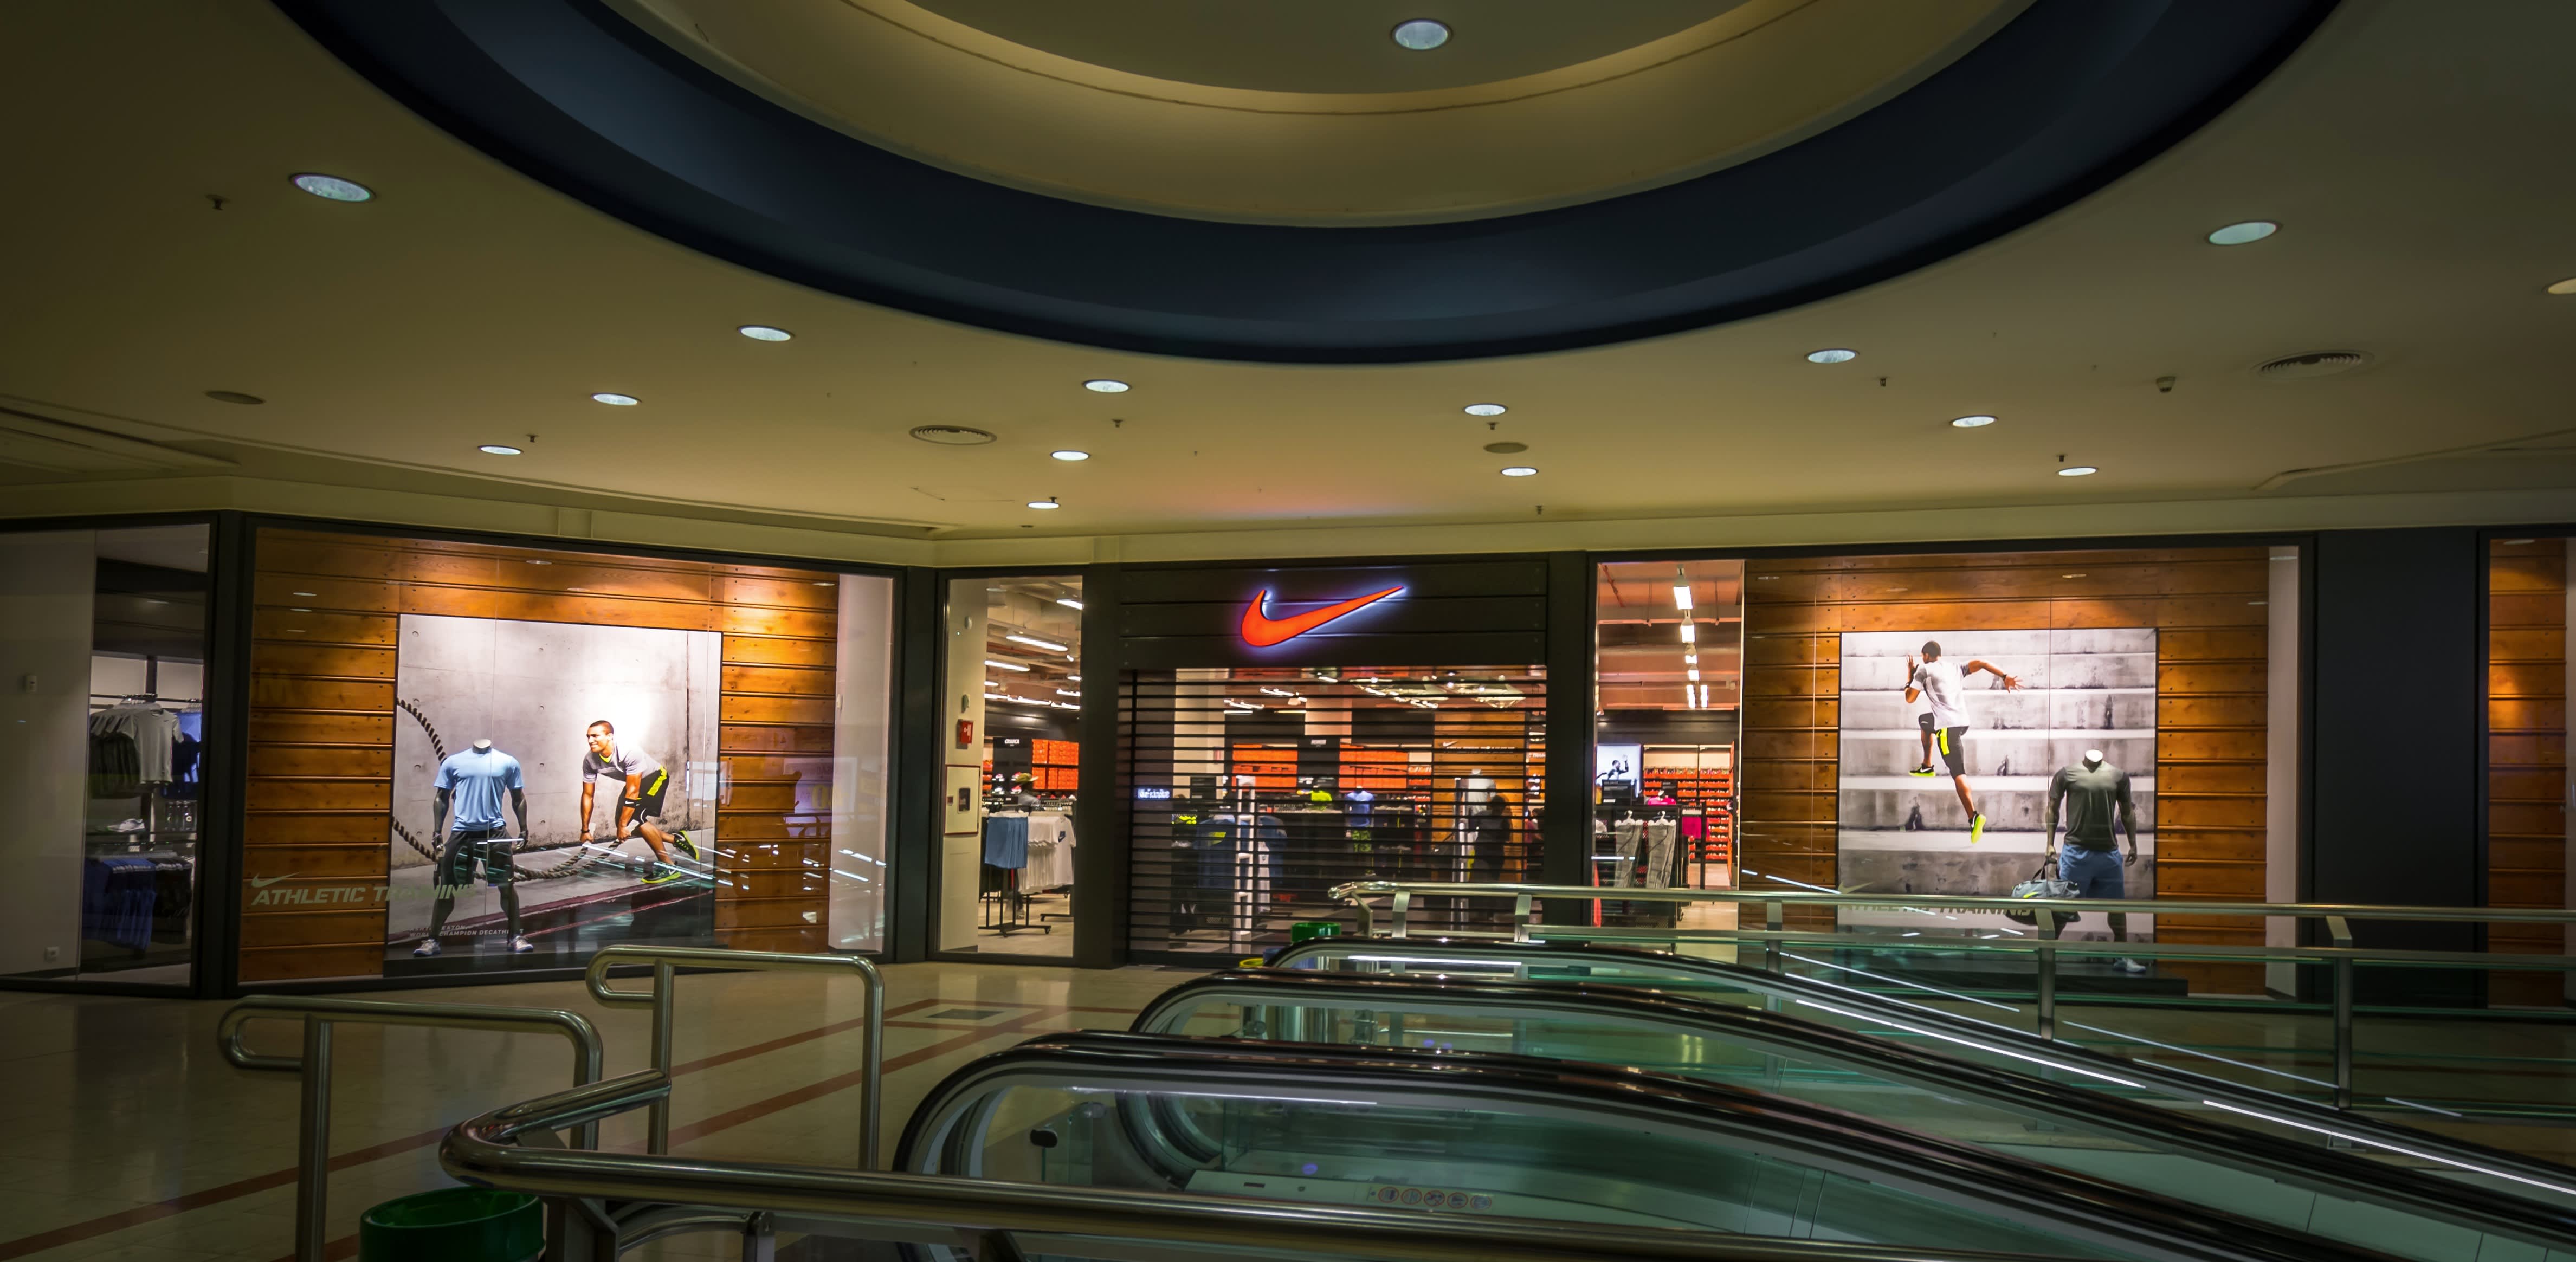 Nike Stores in Nike.com